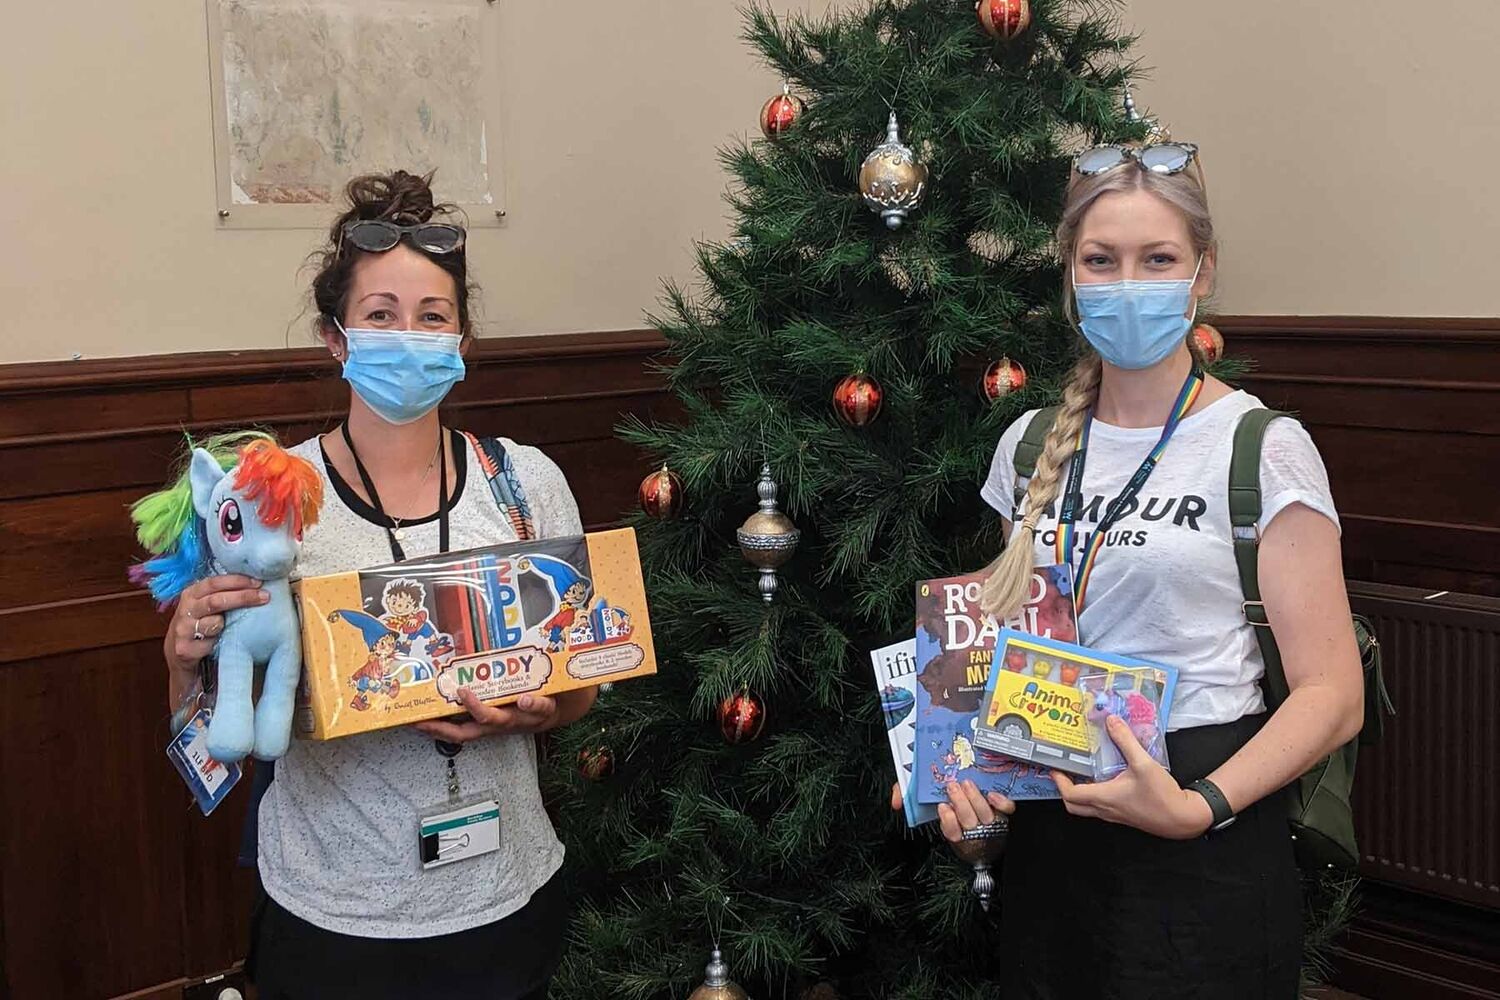 Mackillop Staff Holding Gifts And Toys Infront Of Christmas Tree Wearing Covid Masks